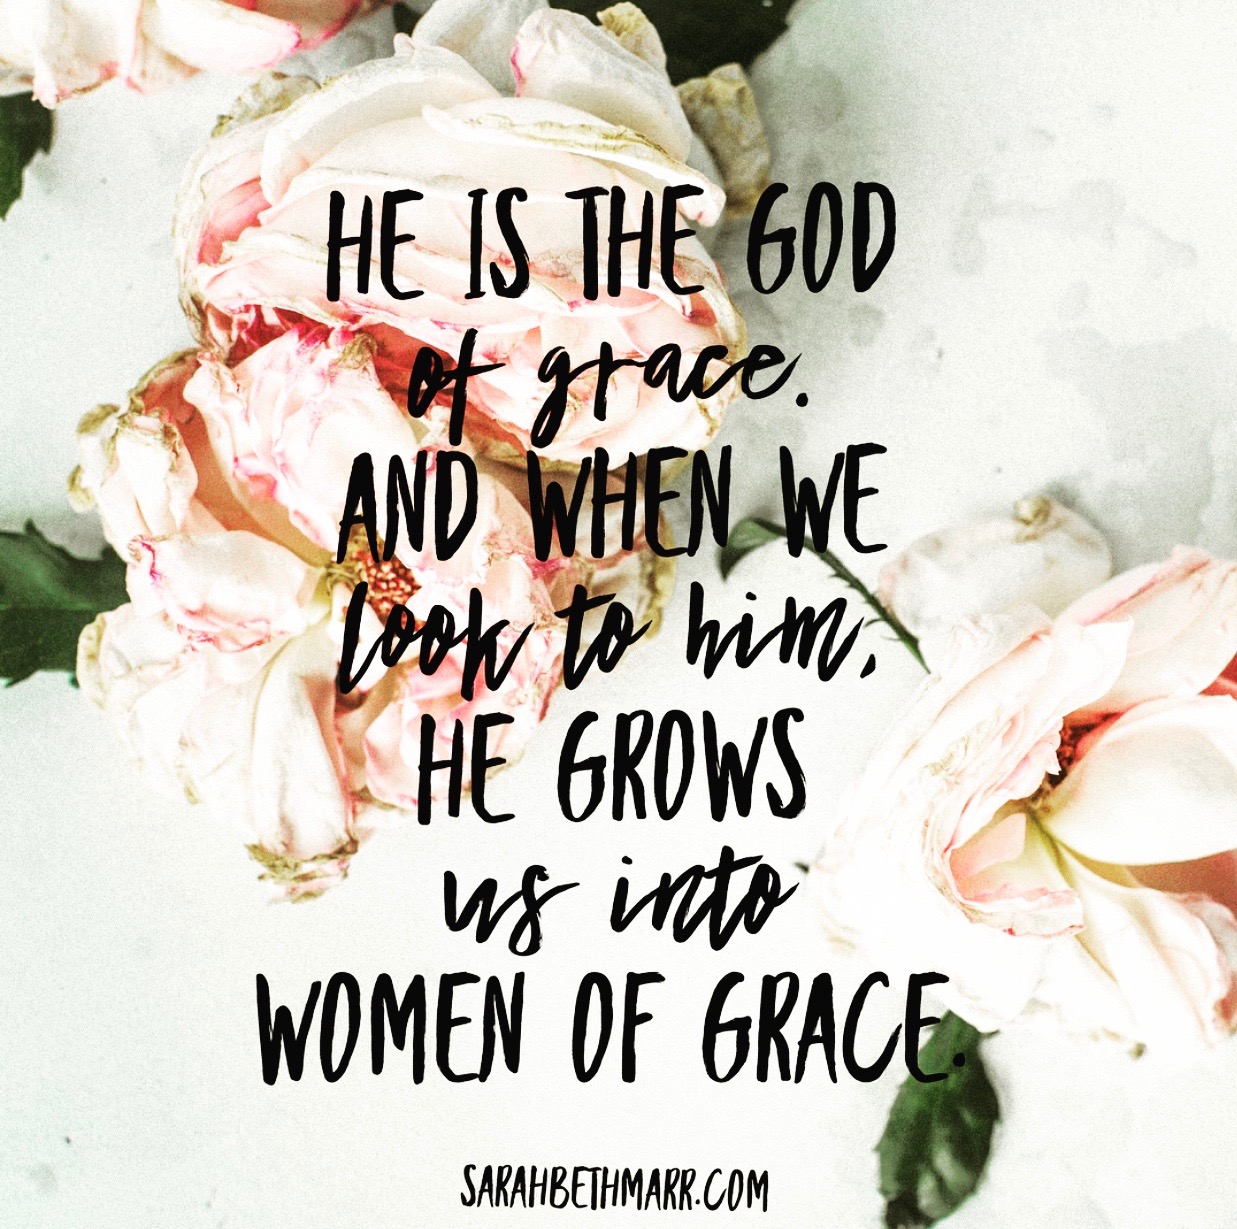 The Woman I Want to Be – FULL OF GRACE